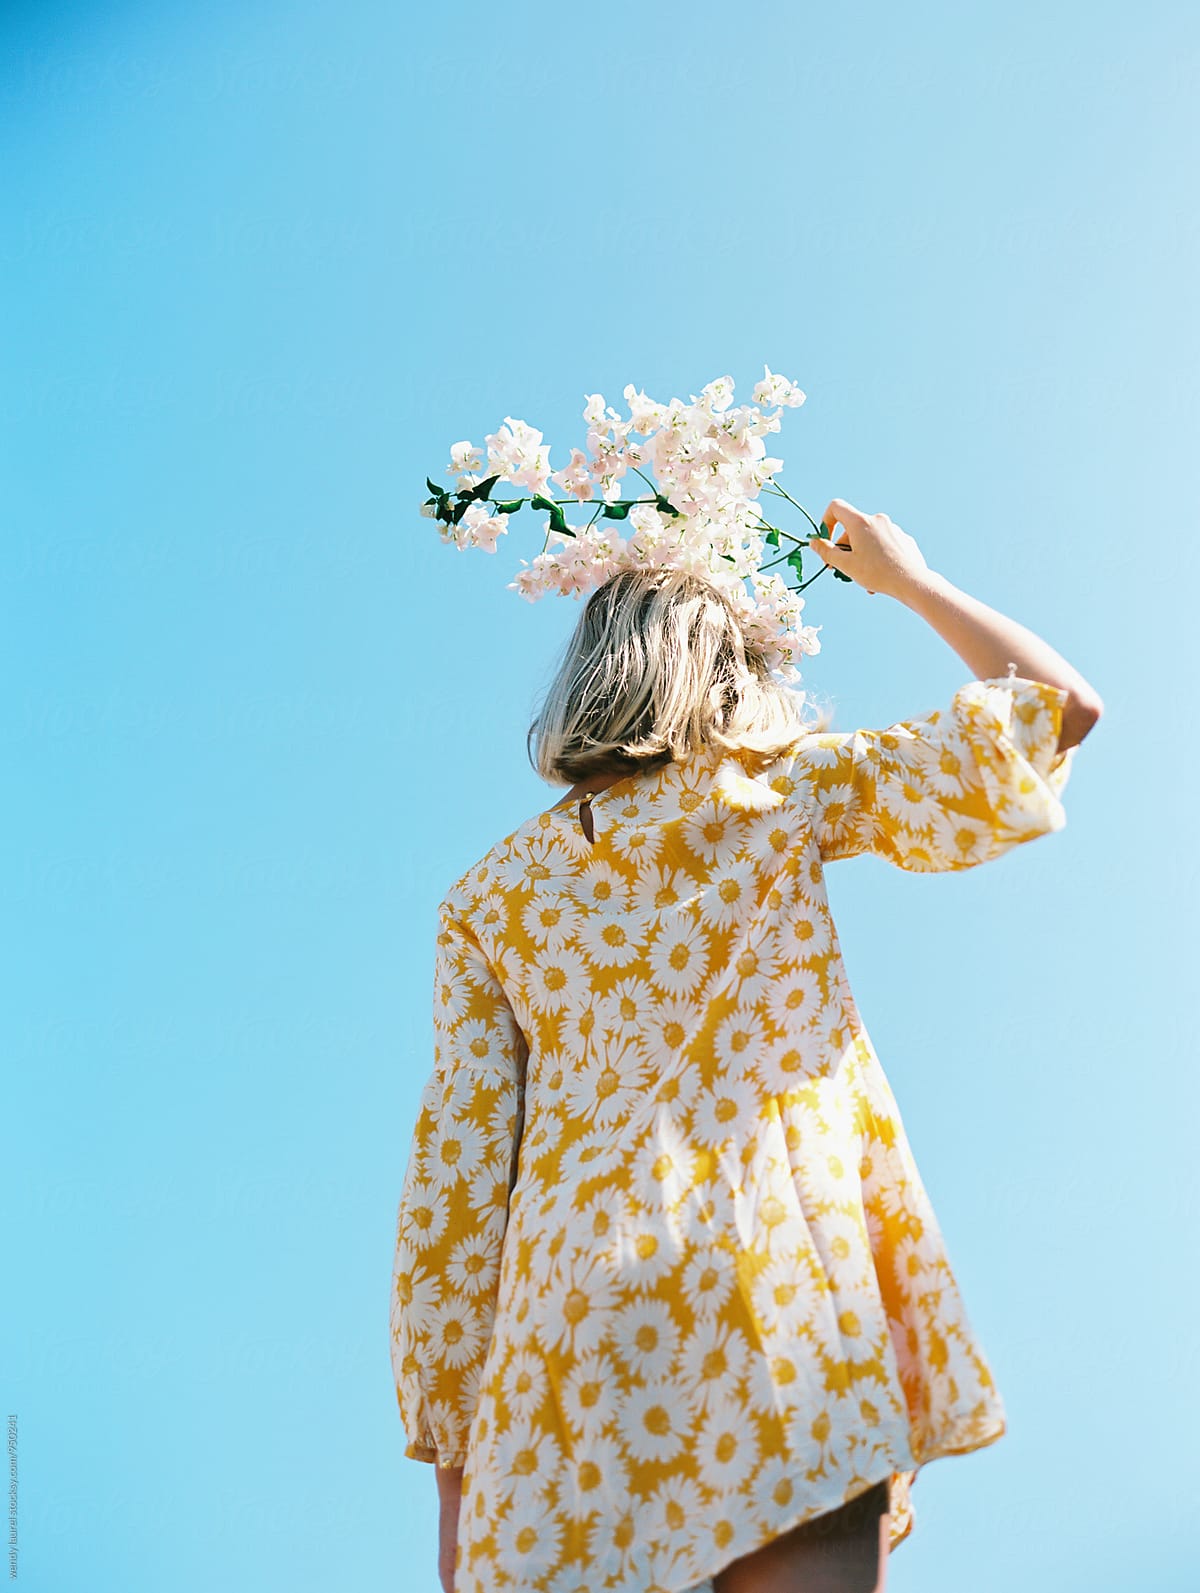 blonde girl with yellow floral dress against blue sky with flowers on her head